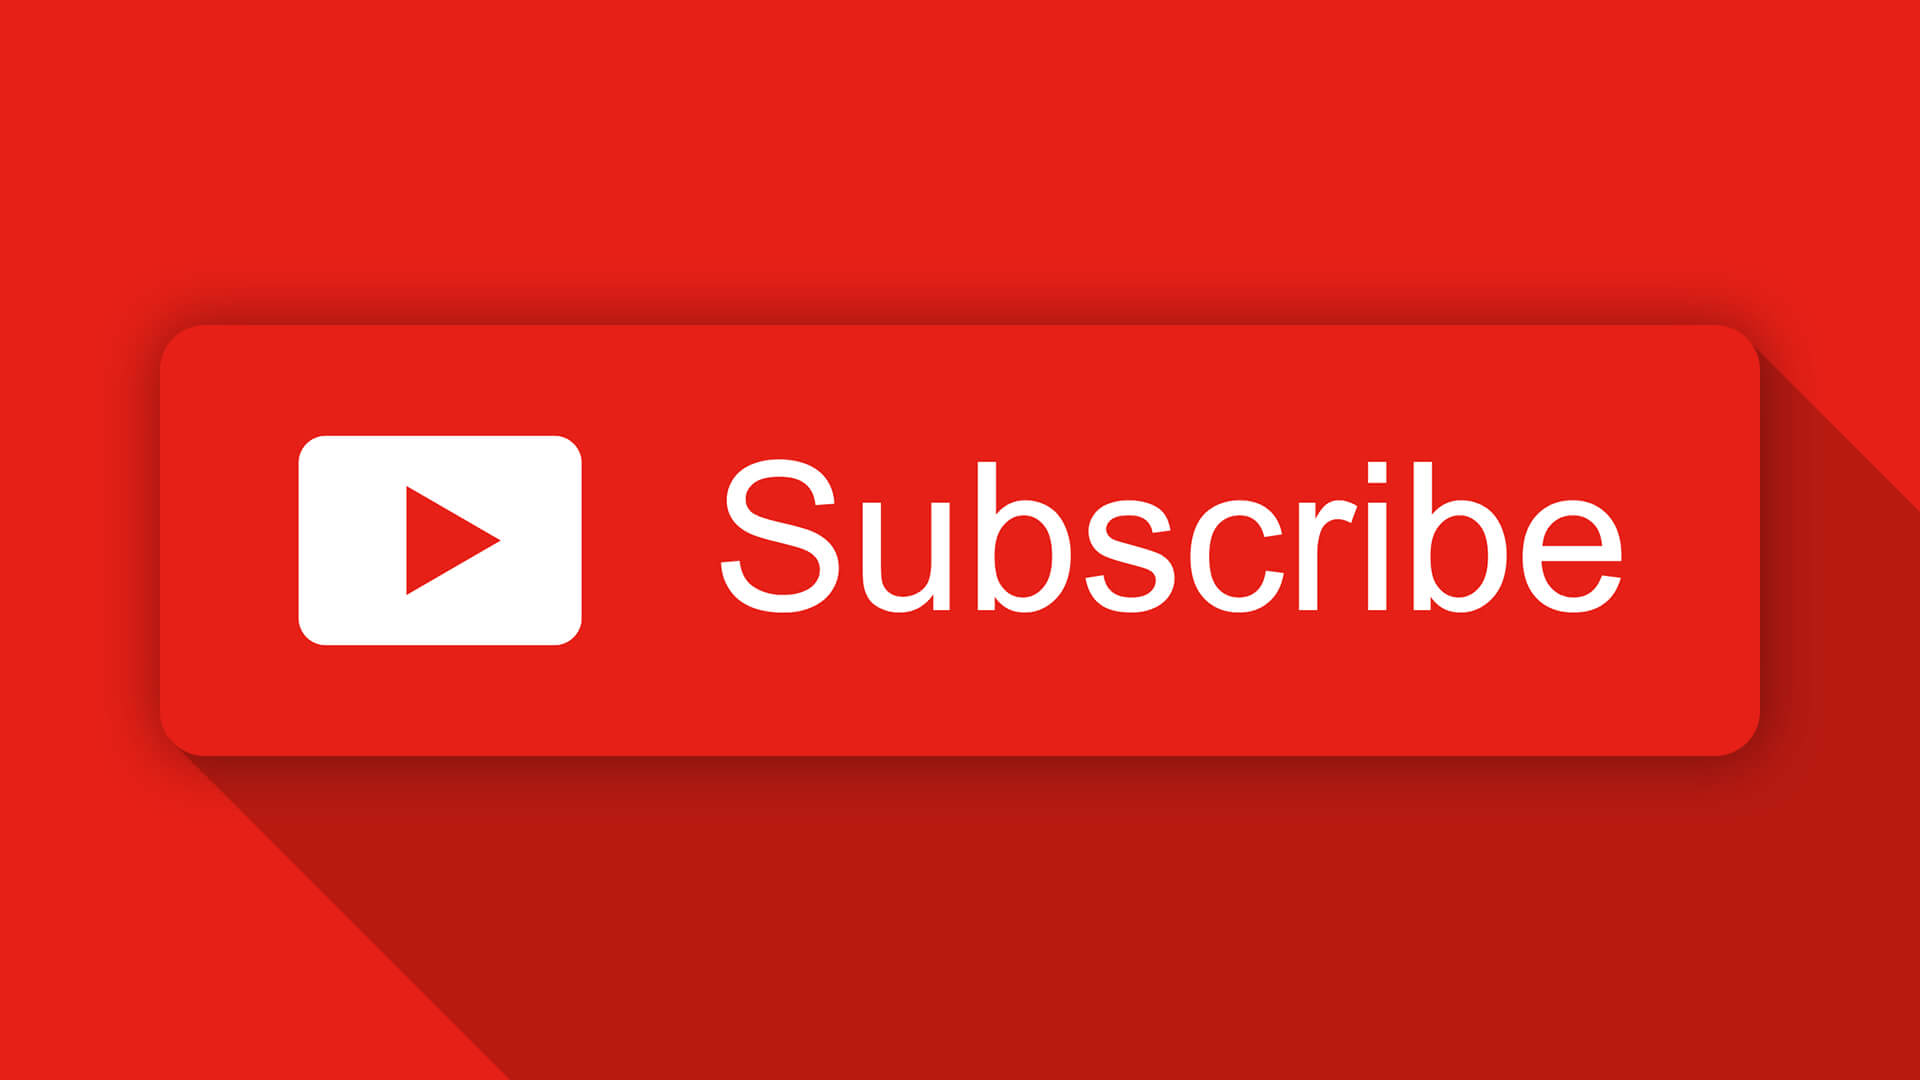 Free YouTube Subscribe Button Download Design Inspiration By AlfredoCreates 1 1